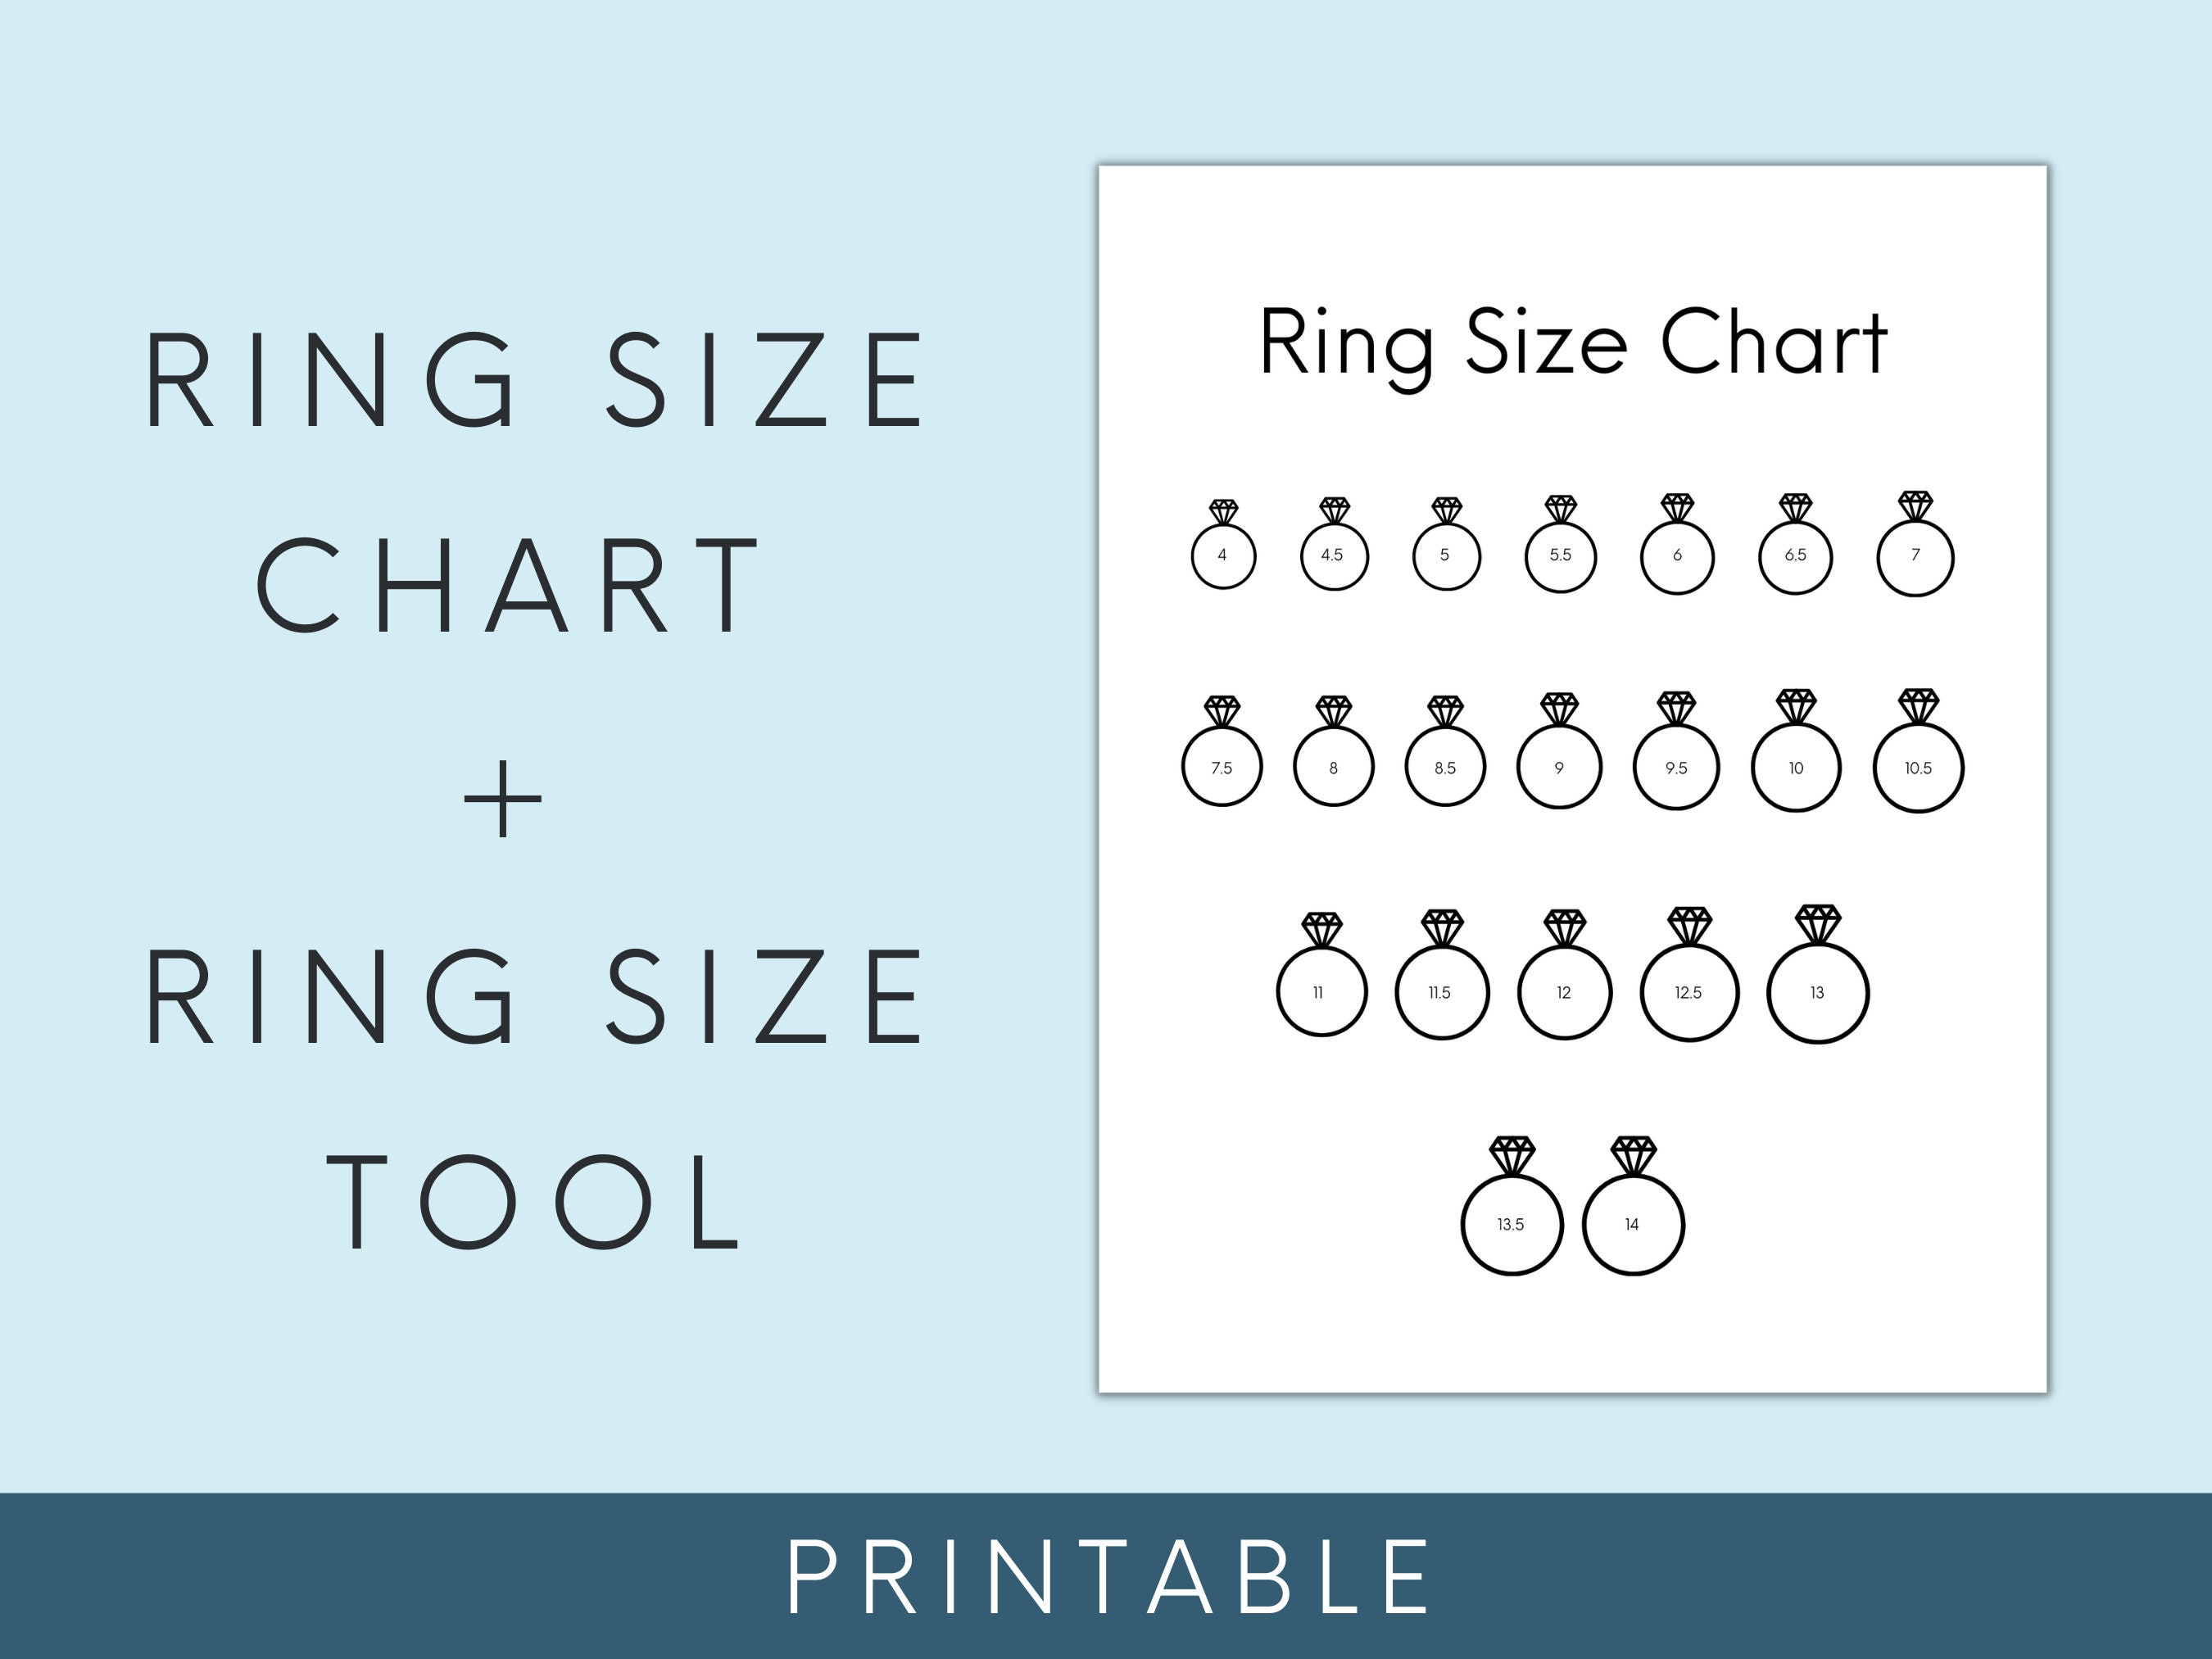 Printable Ring Size Chart Ring Sizer Tool Find Your Ring Ubicaciondepersonas cdmx gob mx